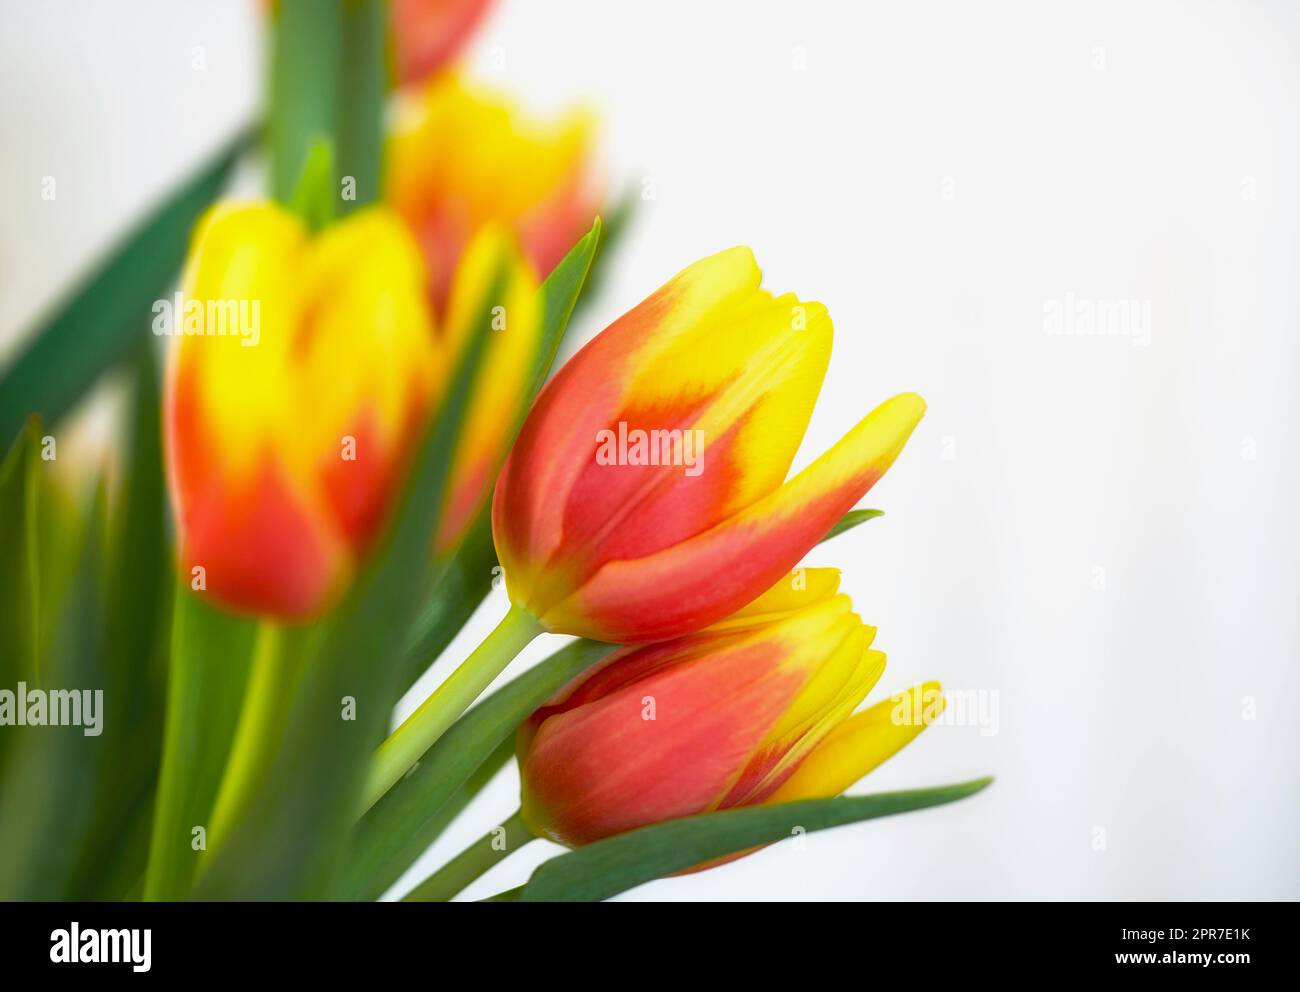 Fresh orange and yellow tulips against a white background. Closeup of bunch of beautiful flowers with vibrant petals and green leaves. Blossoming bouquet symbolizing hope and love for valentines day Stock Photo